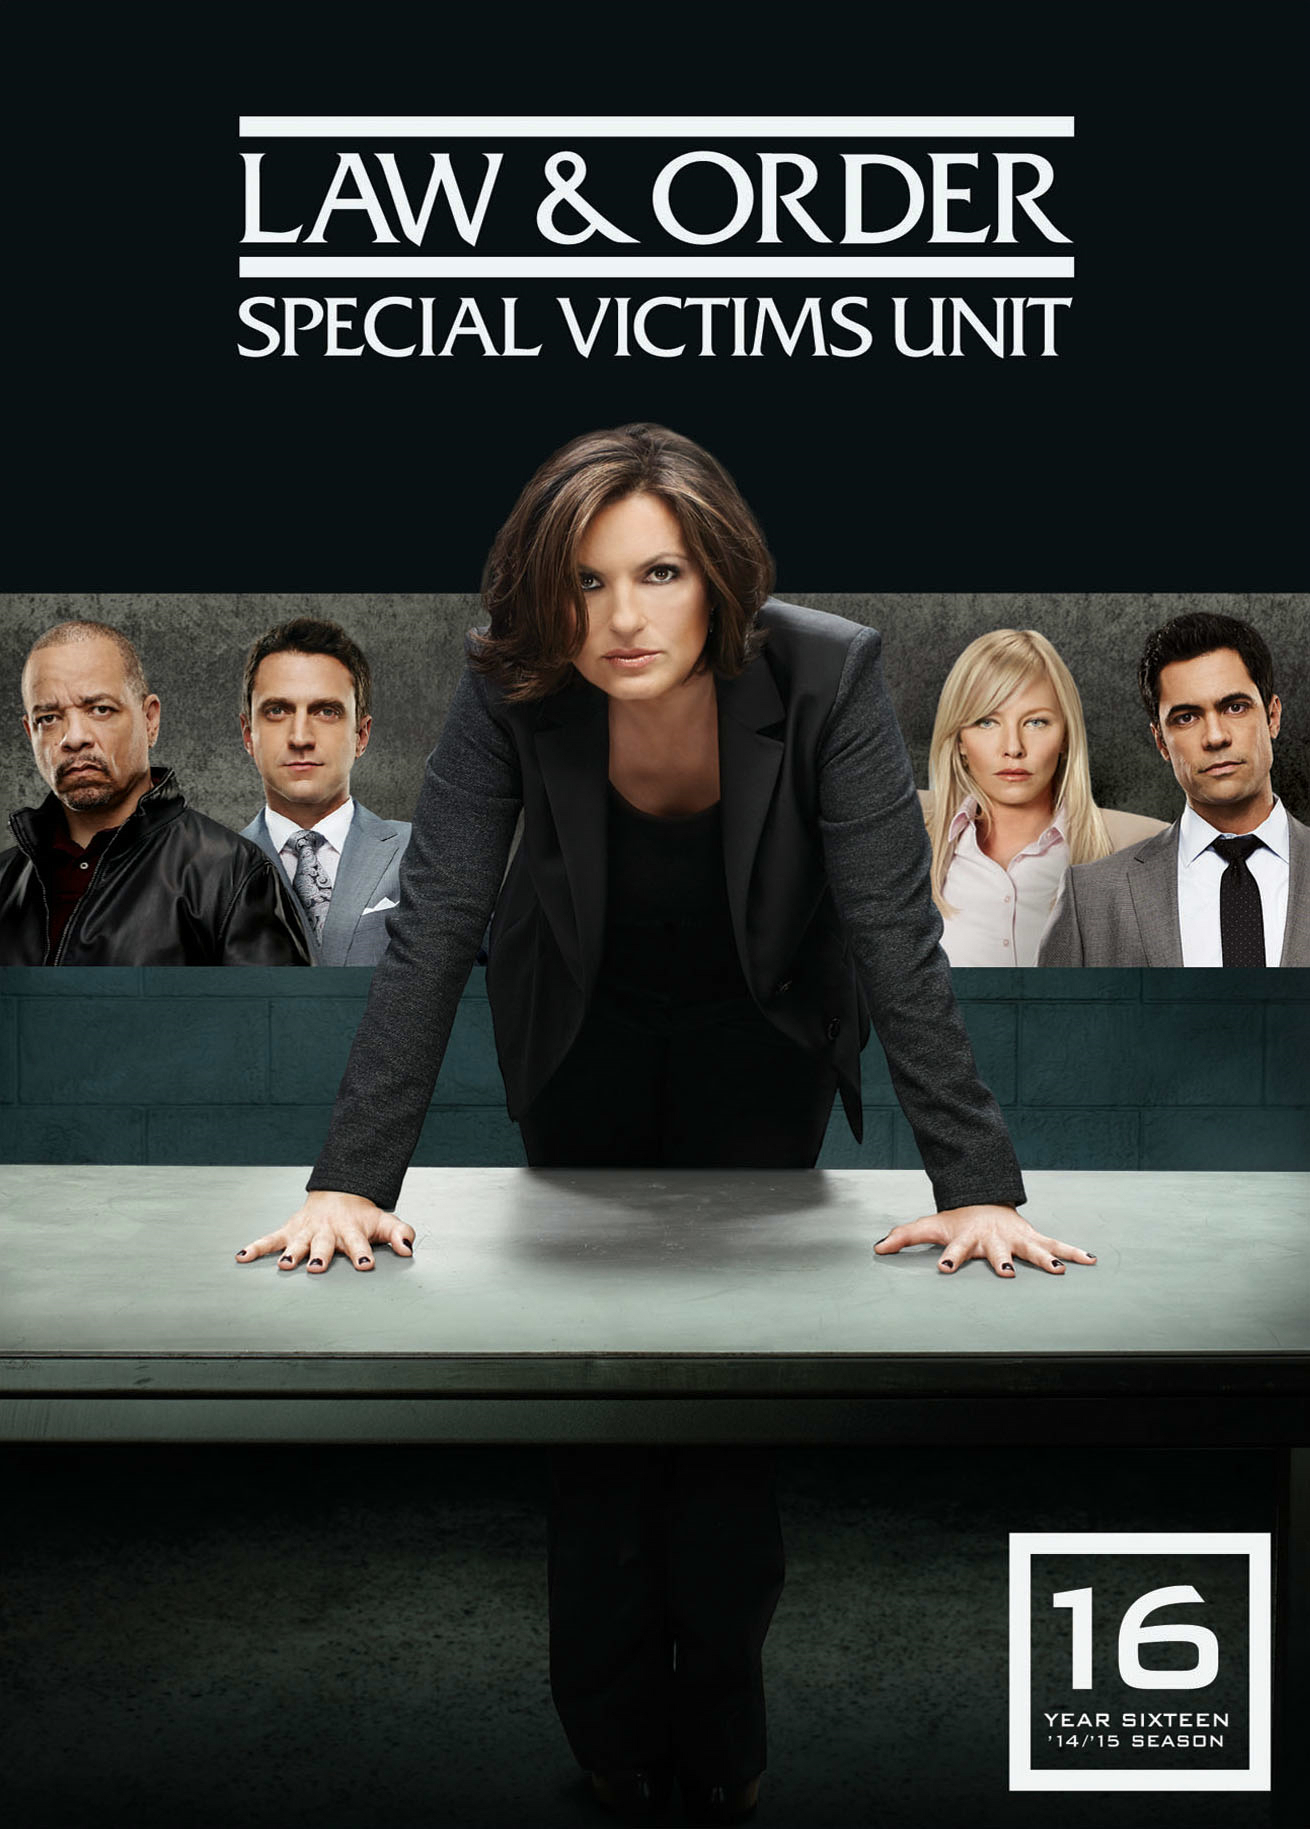 Law And Order - Special Victims Unit: Season 16 - DVD   - Drama Television On DVD - TV Shows On GRUV